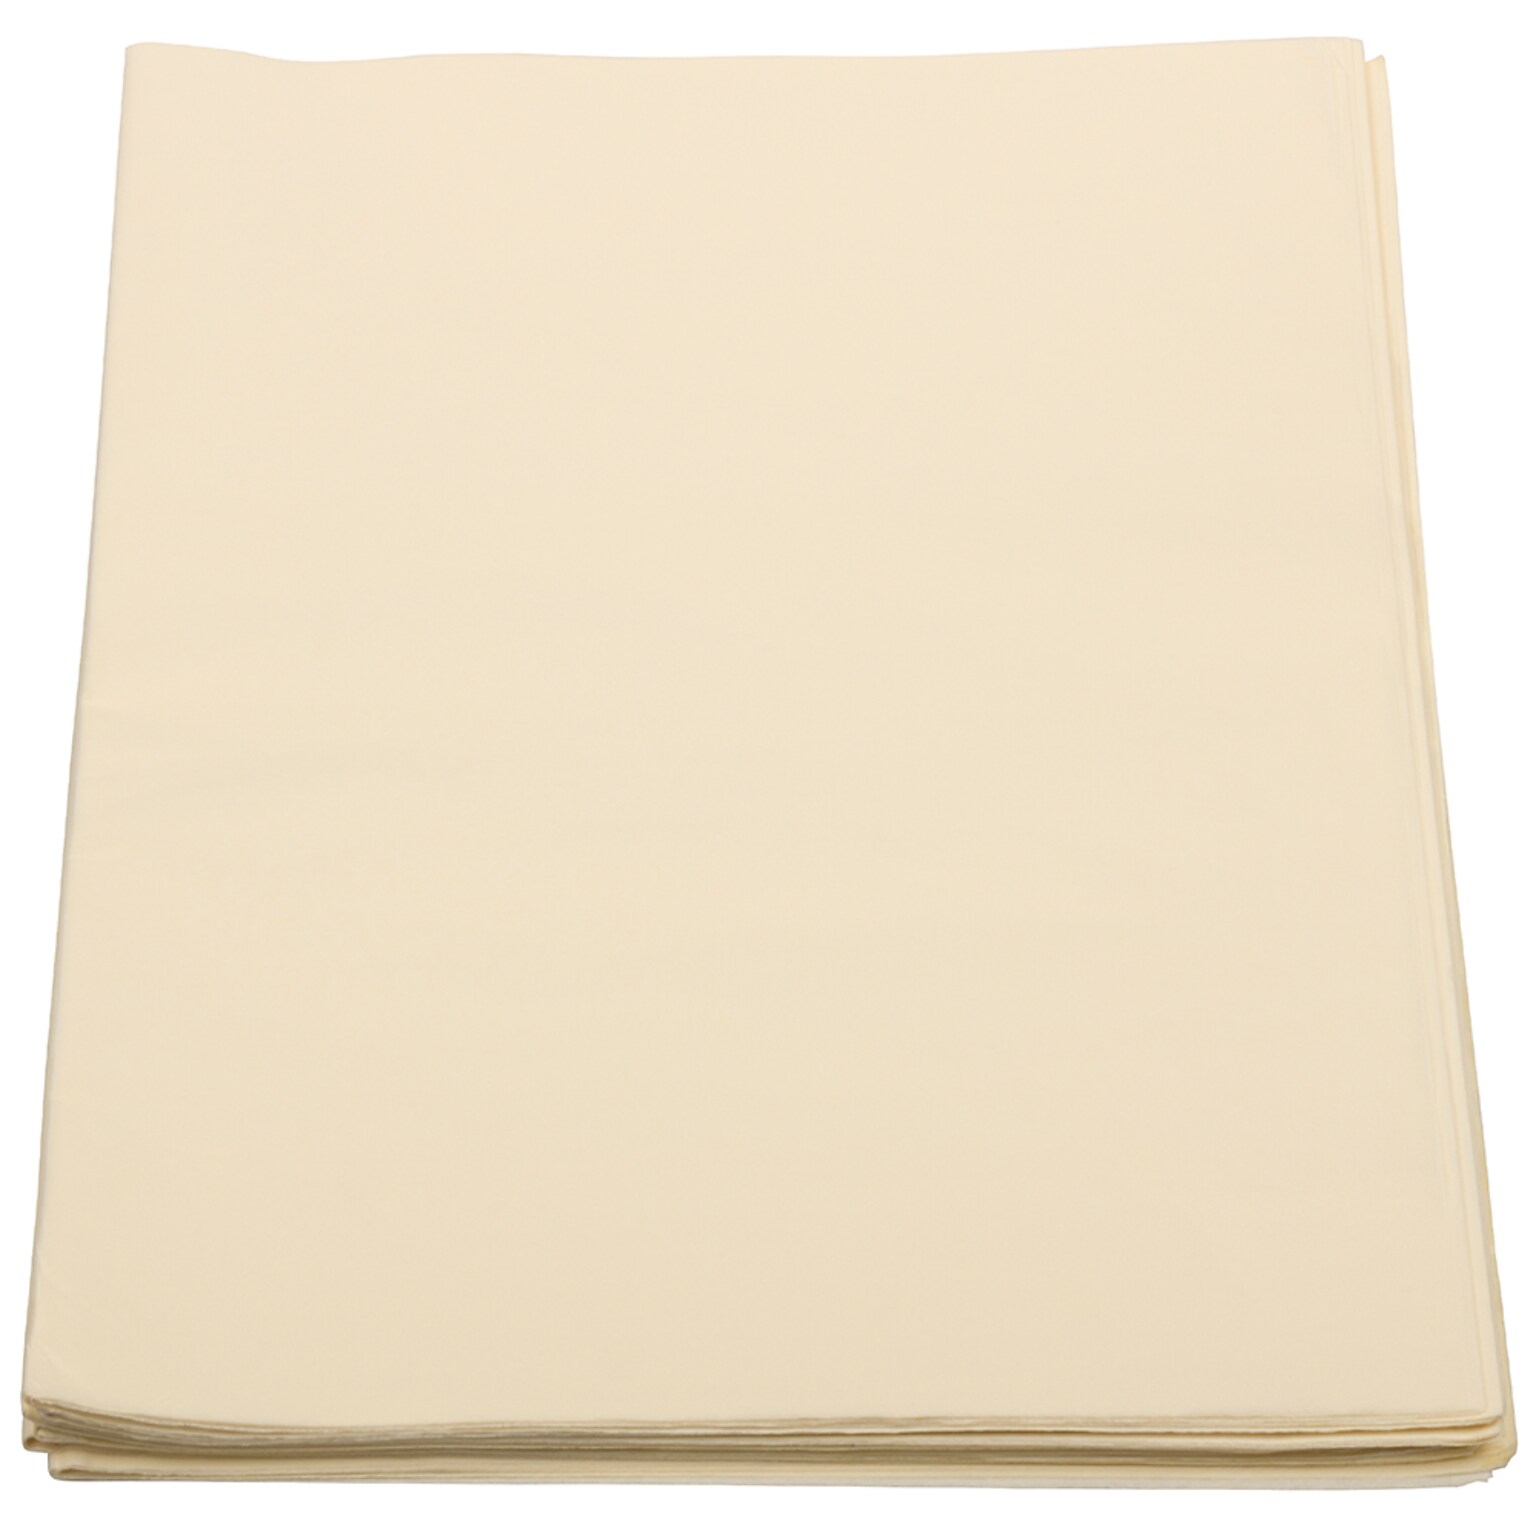 JAM PAPER Tissue Paper, Ivory, 480 Sheets/Ream